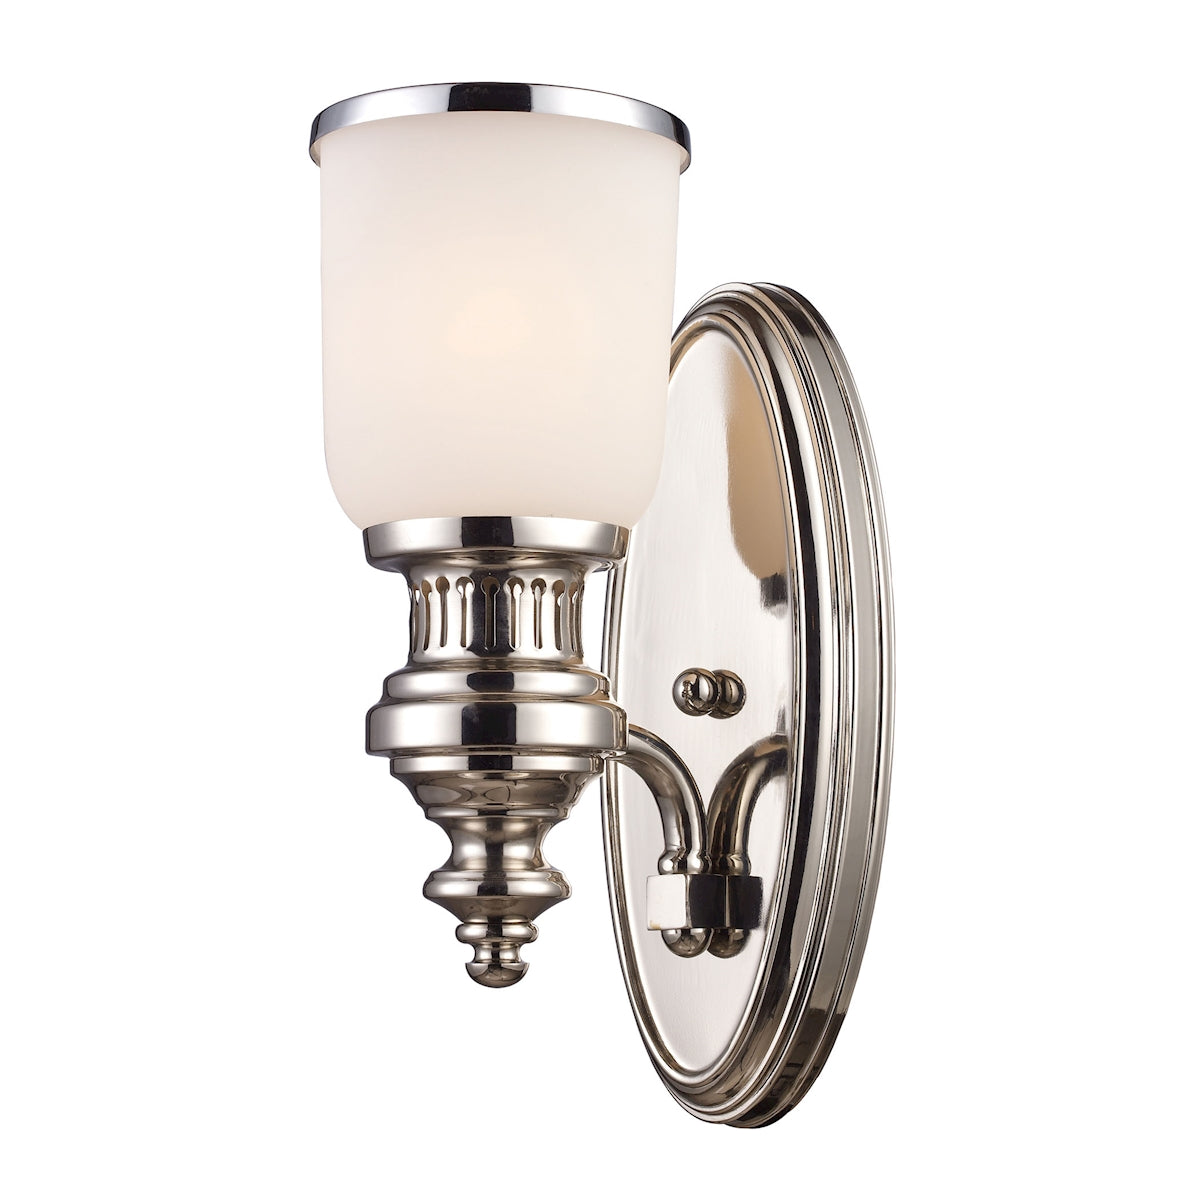 ELK Lighting 66110-1 - Chadwick 5" wide 1-Light Wall Lamp in Polished Nickel with White Glass